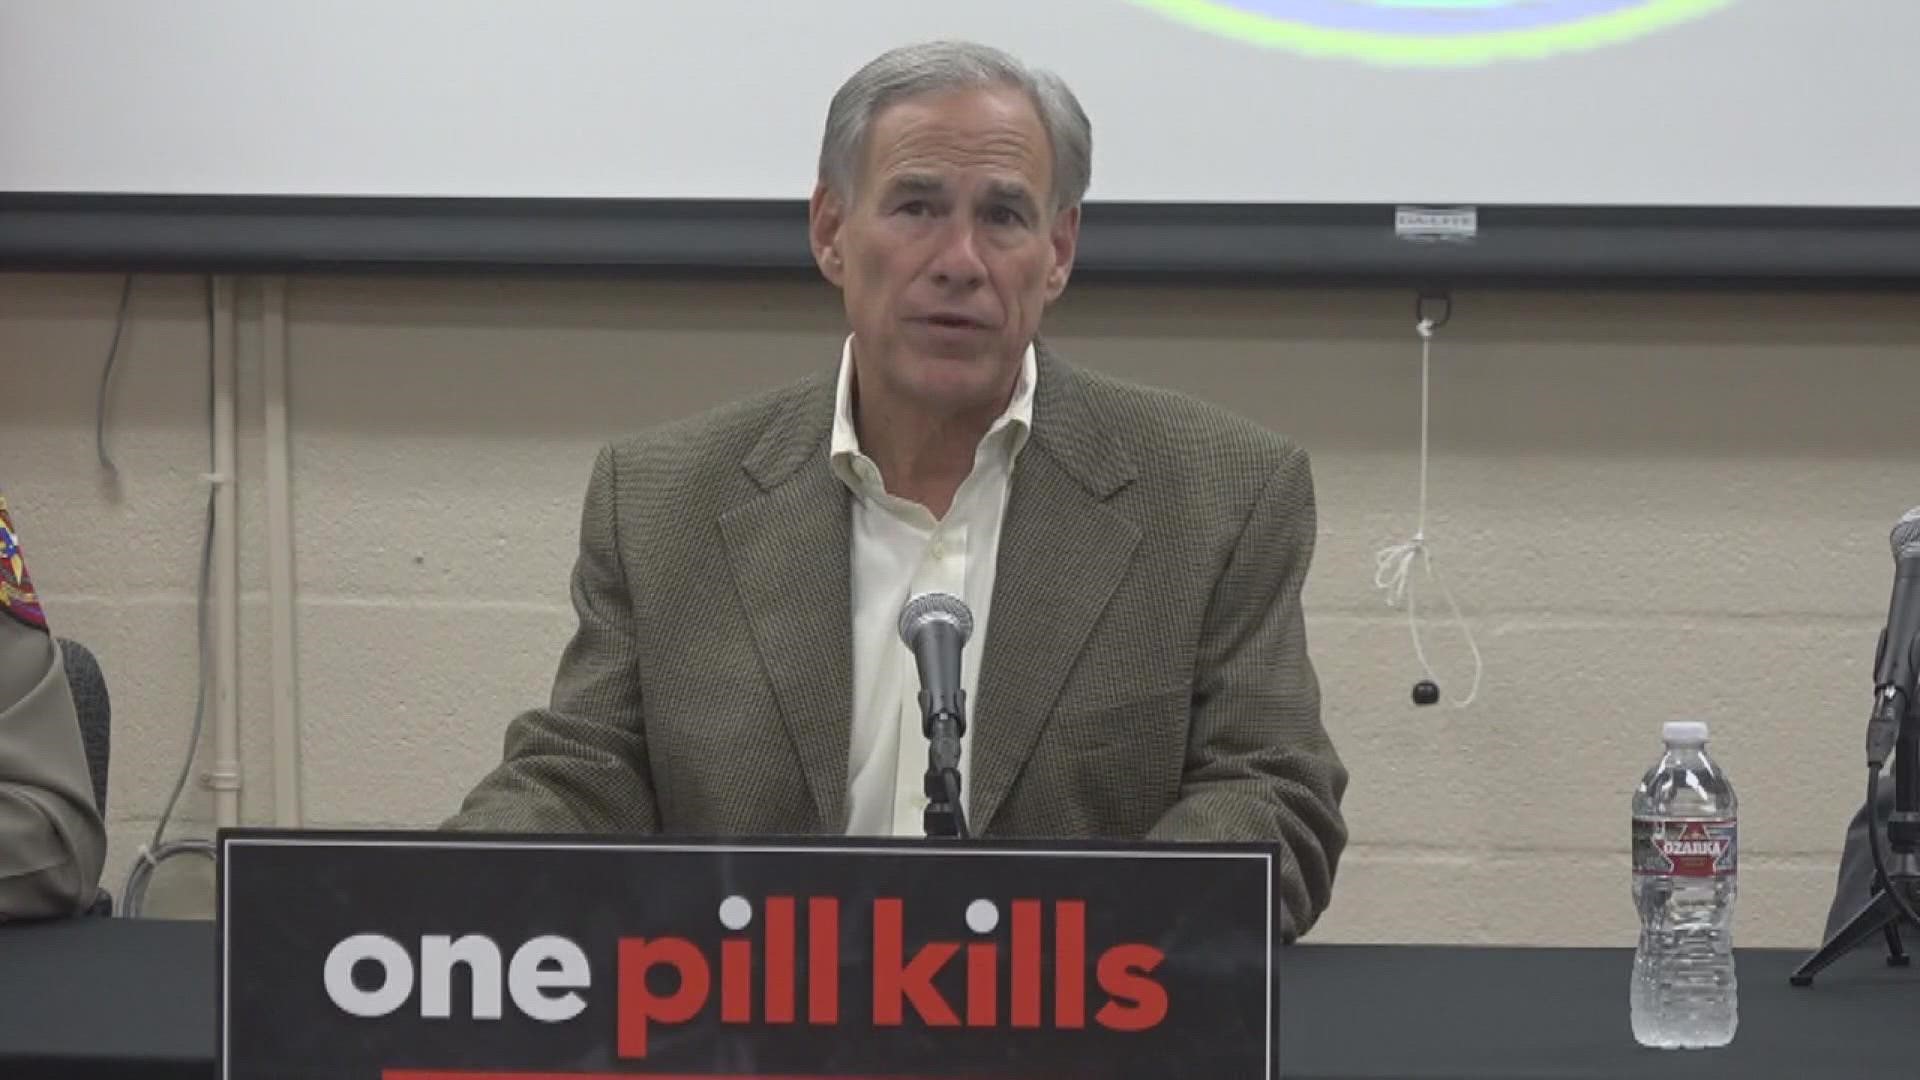 The initiative “One Pill Kills" warns people that even one fentanyl pill can kill a person.